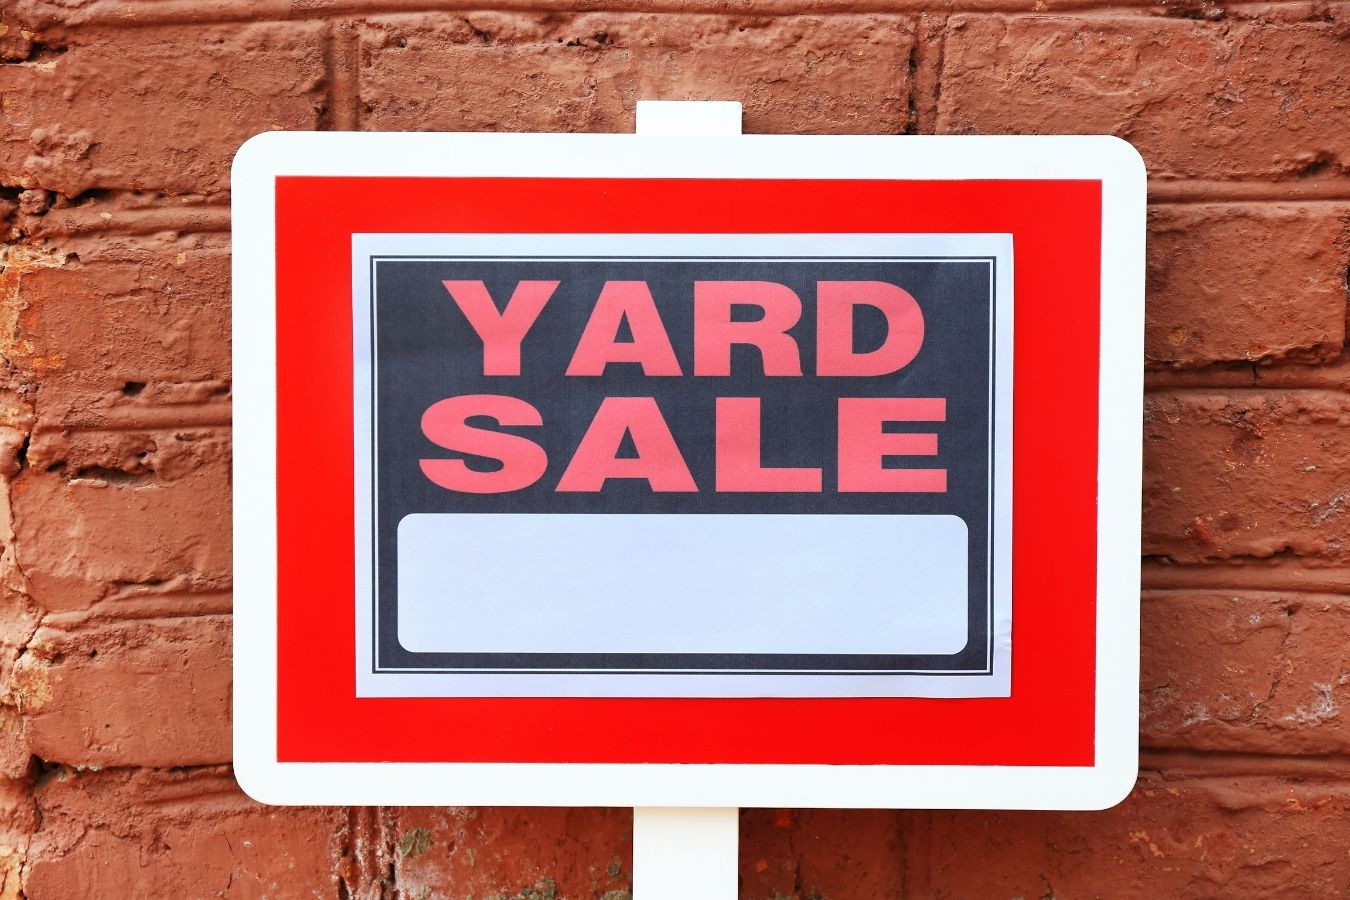 4th Annual Yard Sale Update – Thank You!